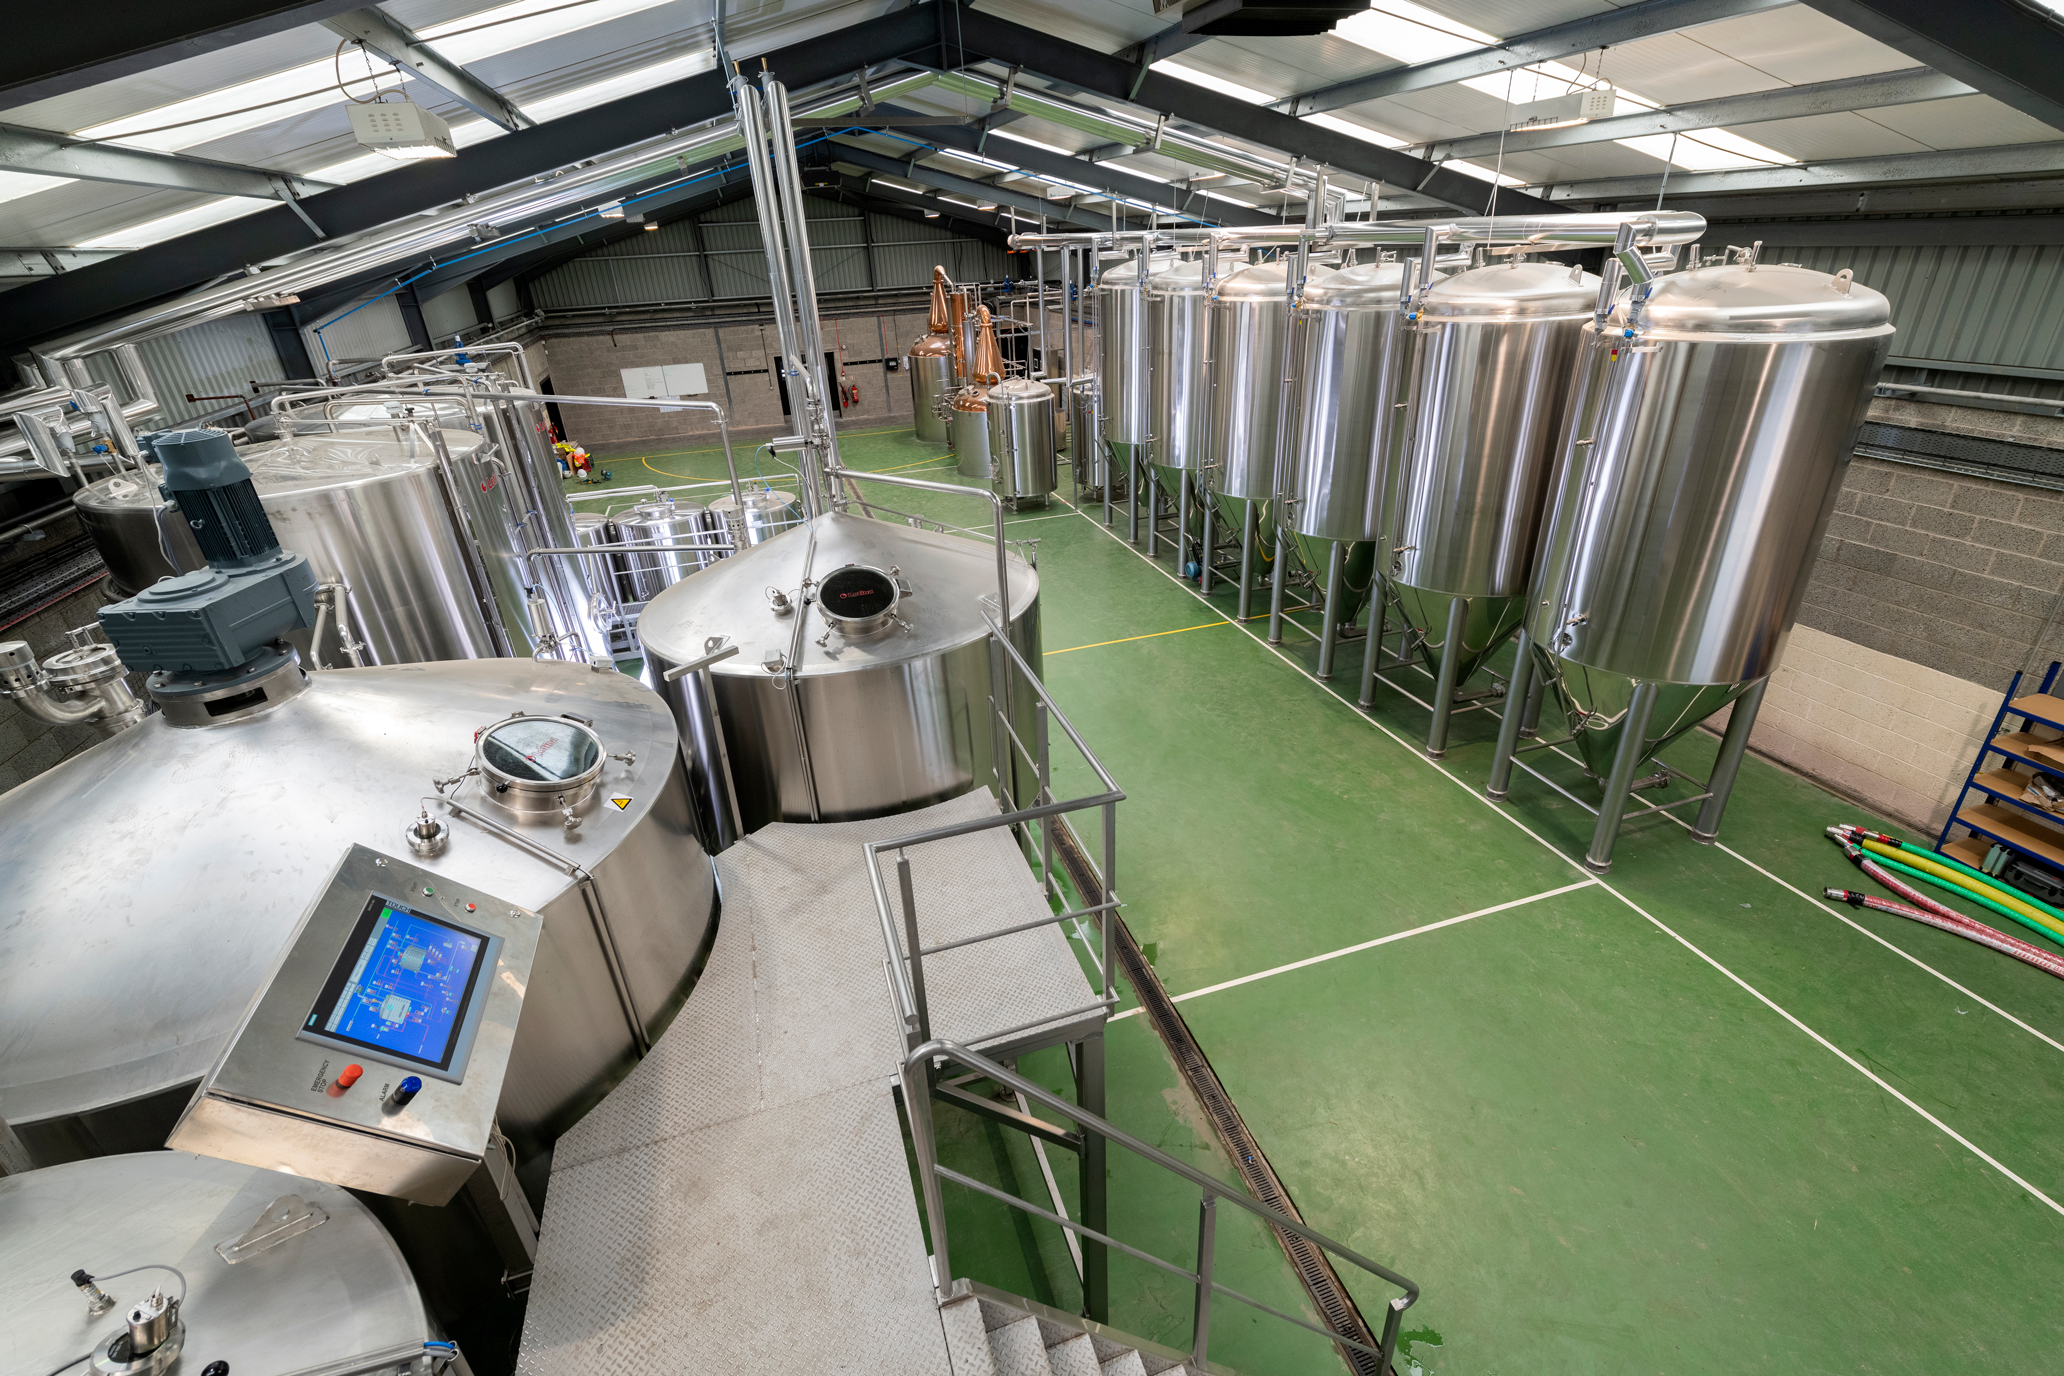 Explore High-Quality Brew Distillery Systems